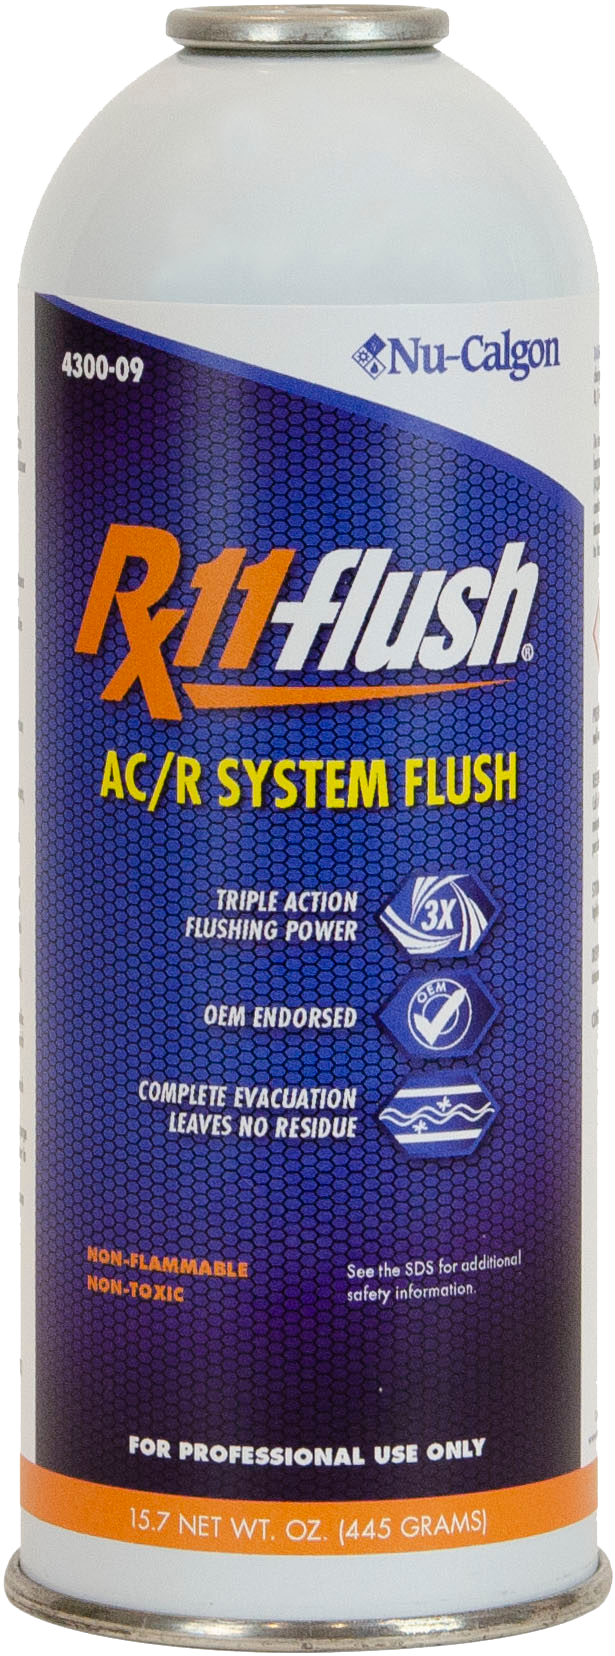 4300-09 RX11 FLUSH 1LB SINGLE CAN - Acid Tests and Neutralizers